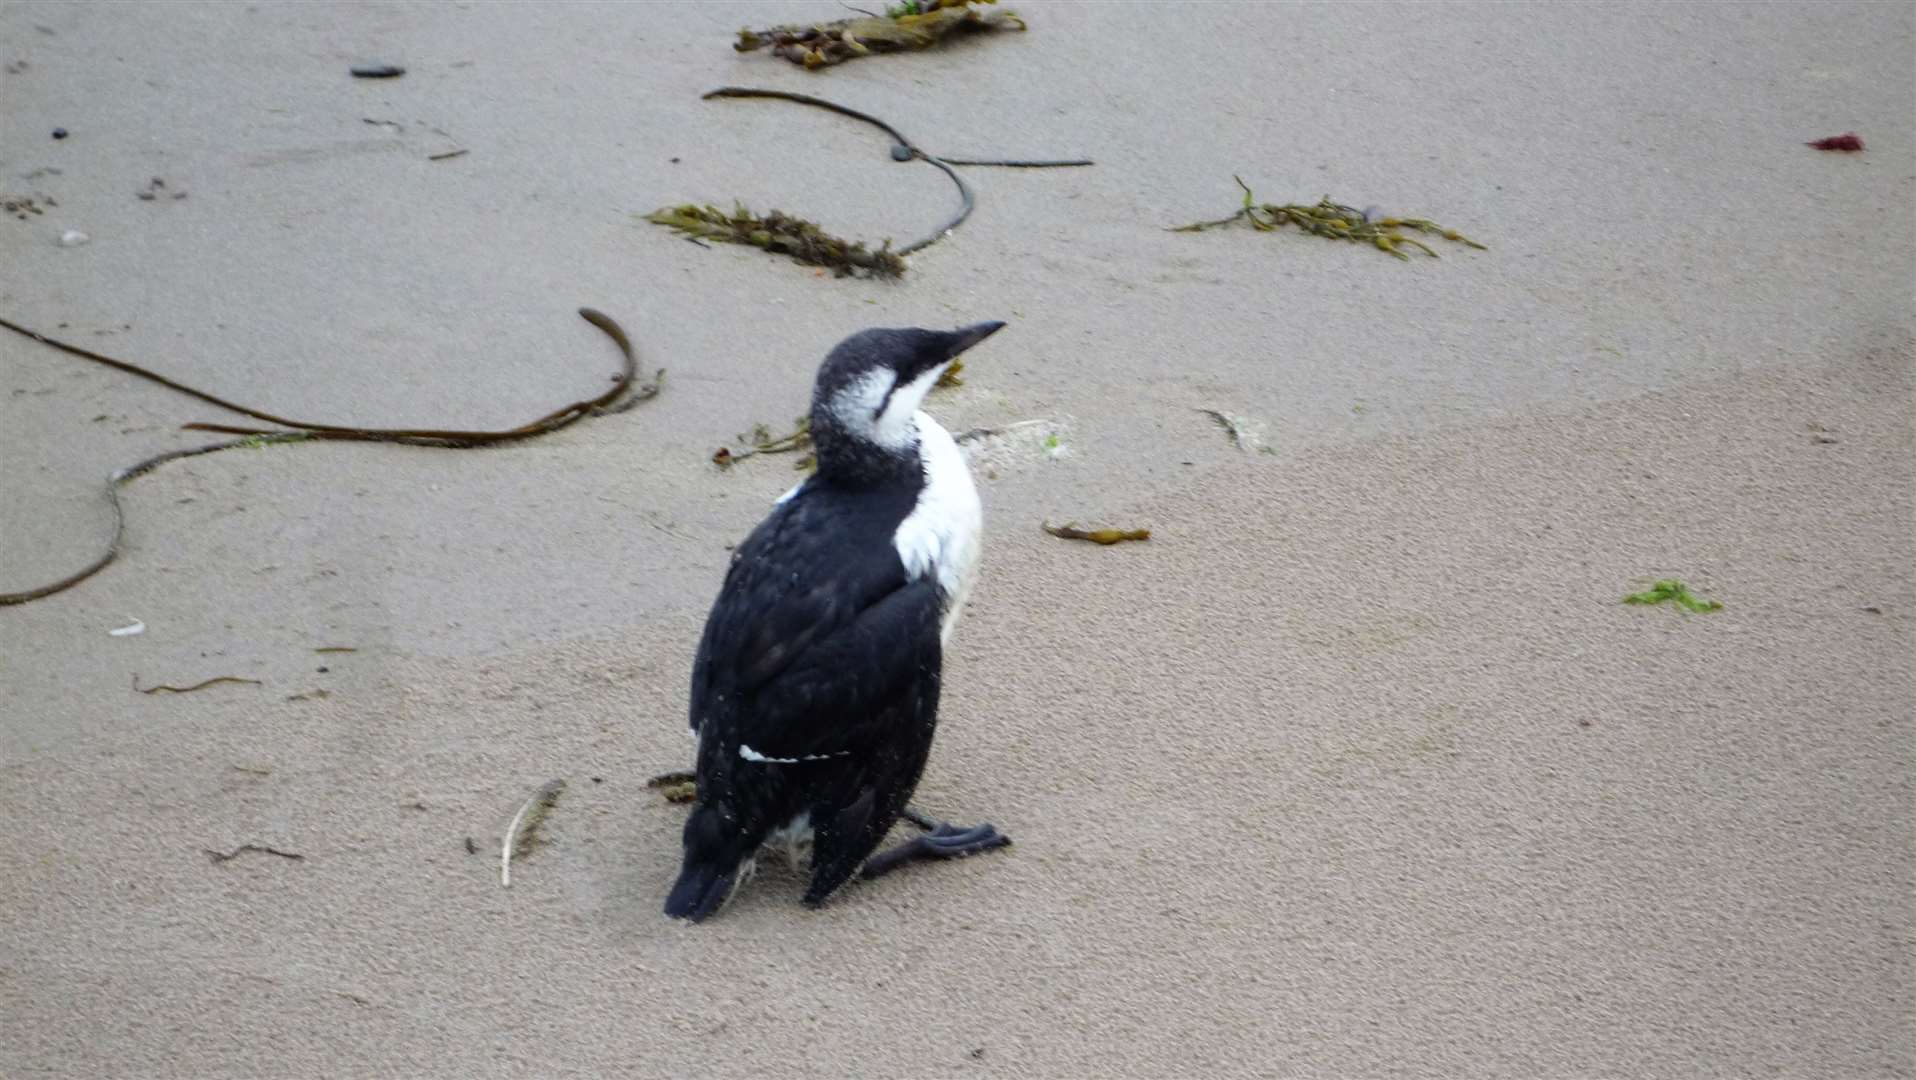 A confused guillemot stands on Keiss beach – a probable victim of bird flu. All around it were the carcases of other native seabirds. Picture: DGS